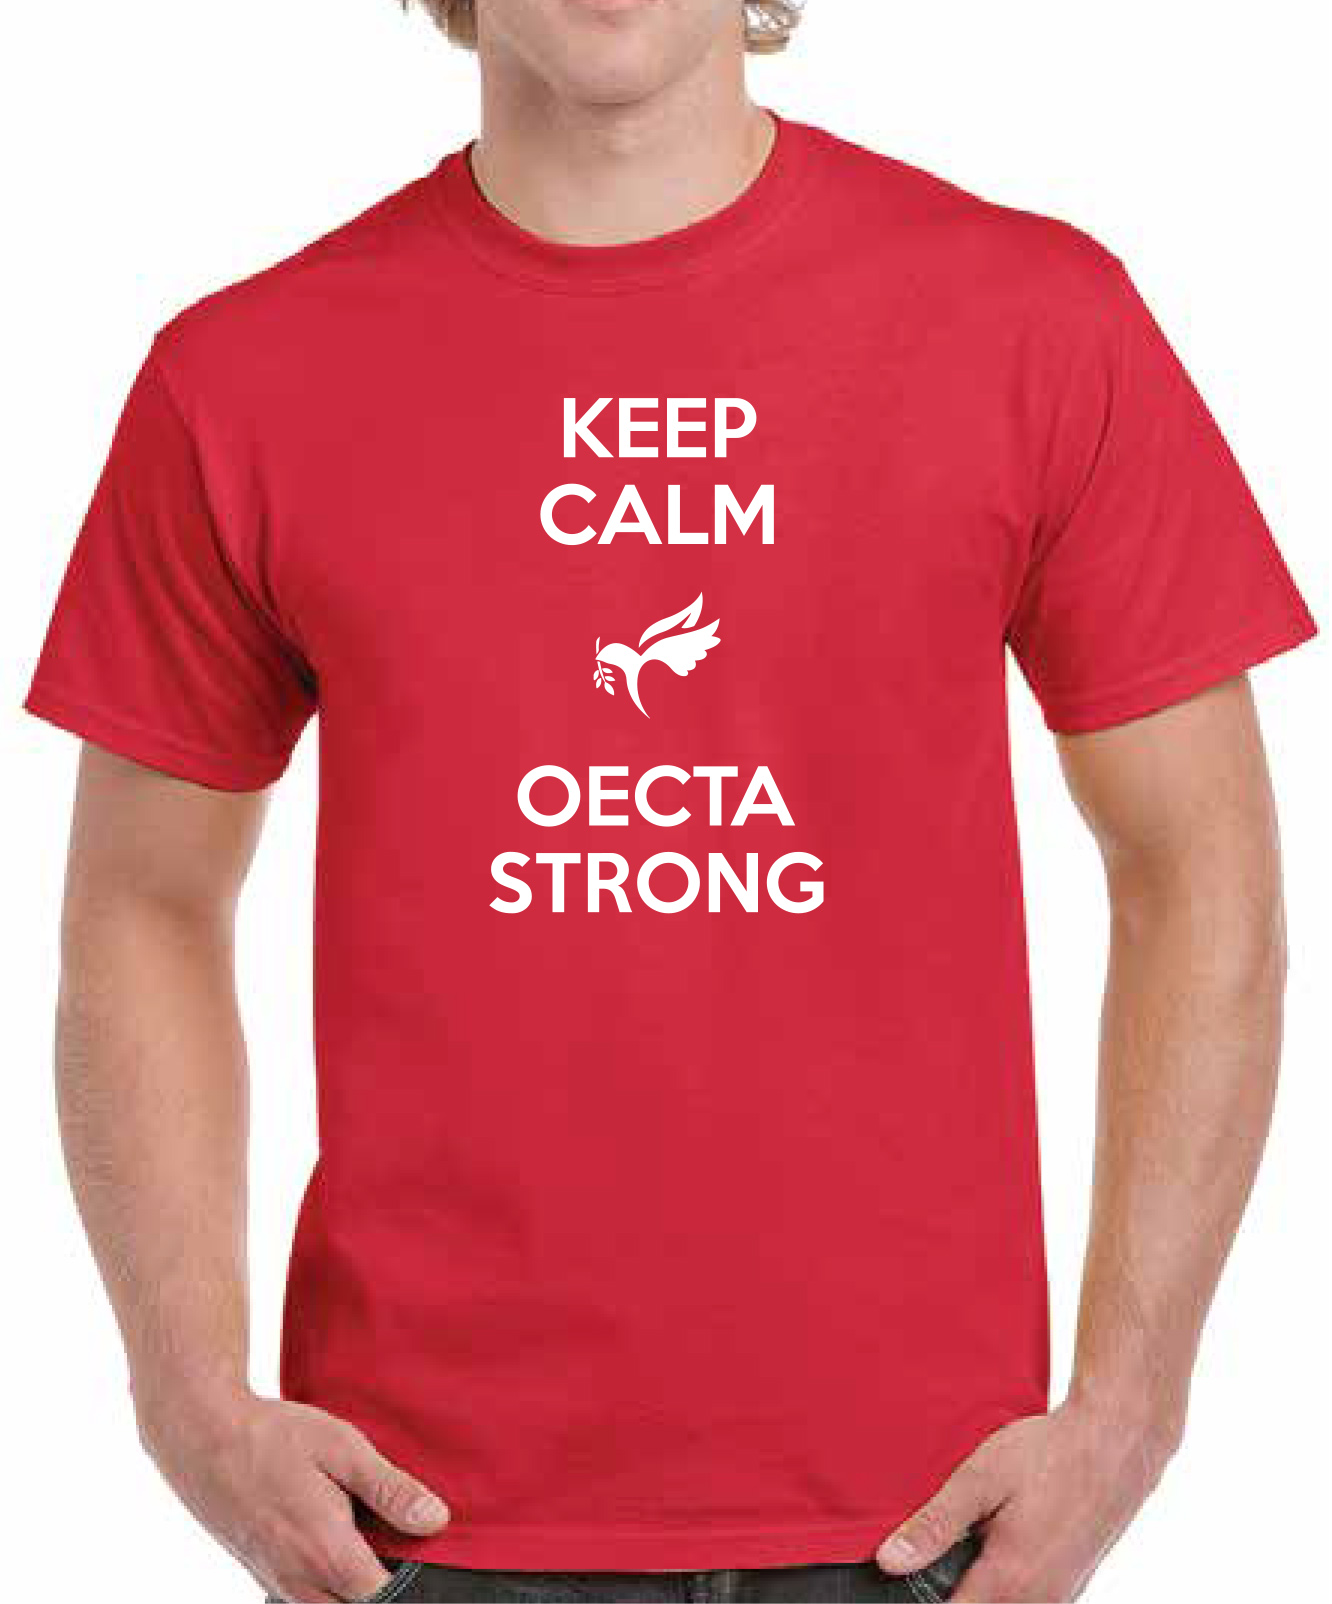 NEW! Wear Red for Ed - Keep Calm OECTA Strong T-shirt ($5 each)